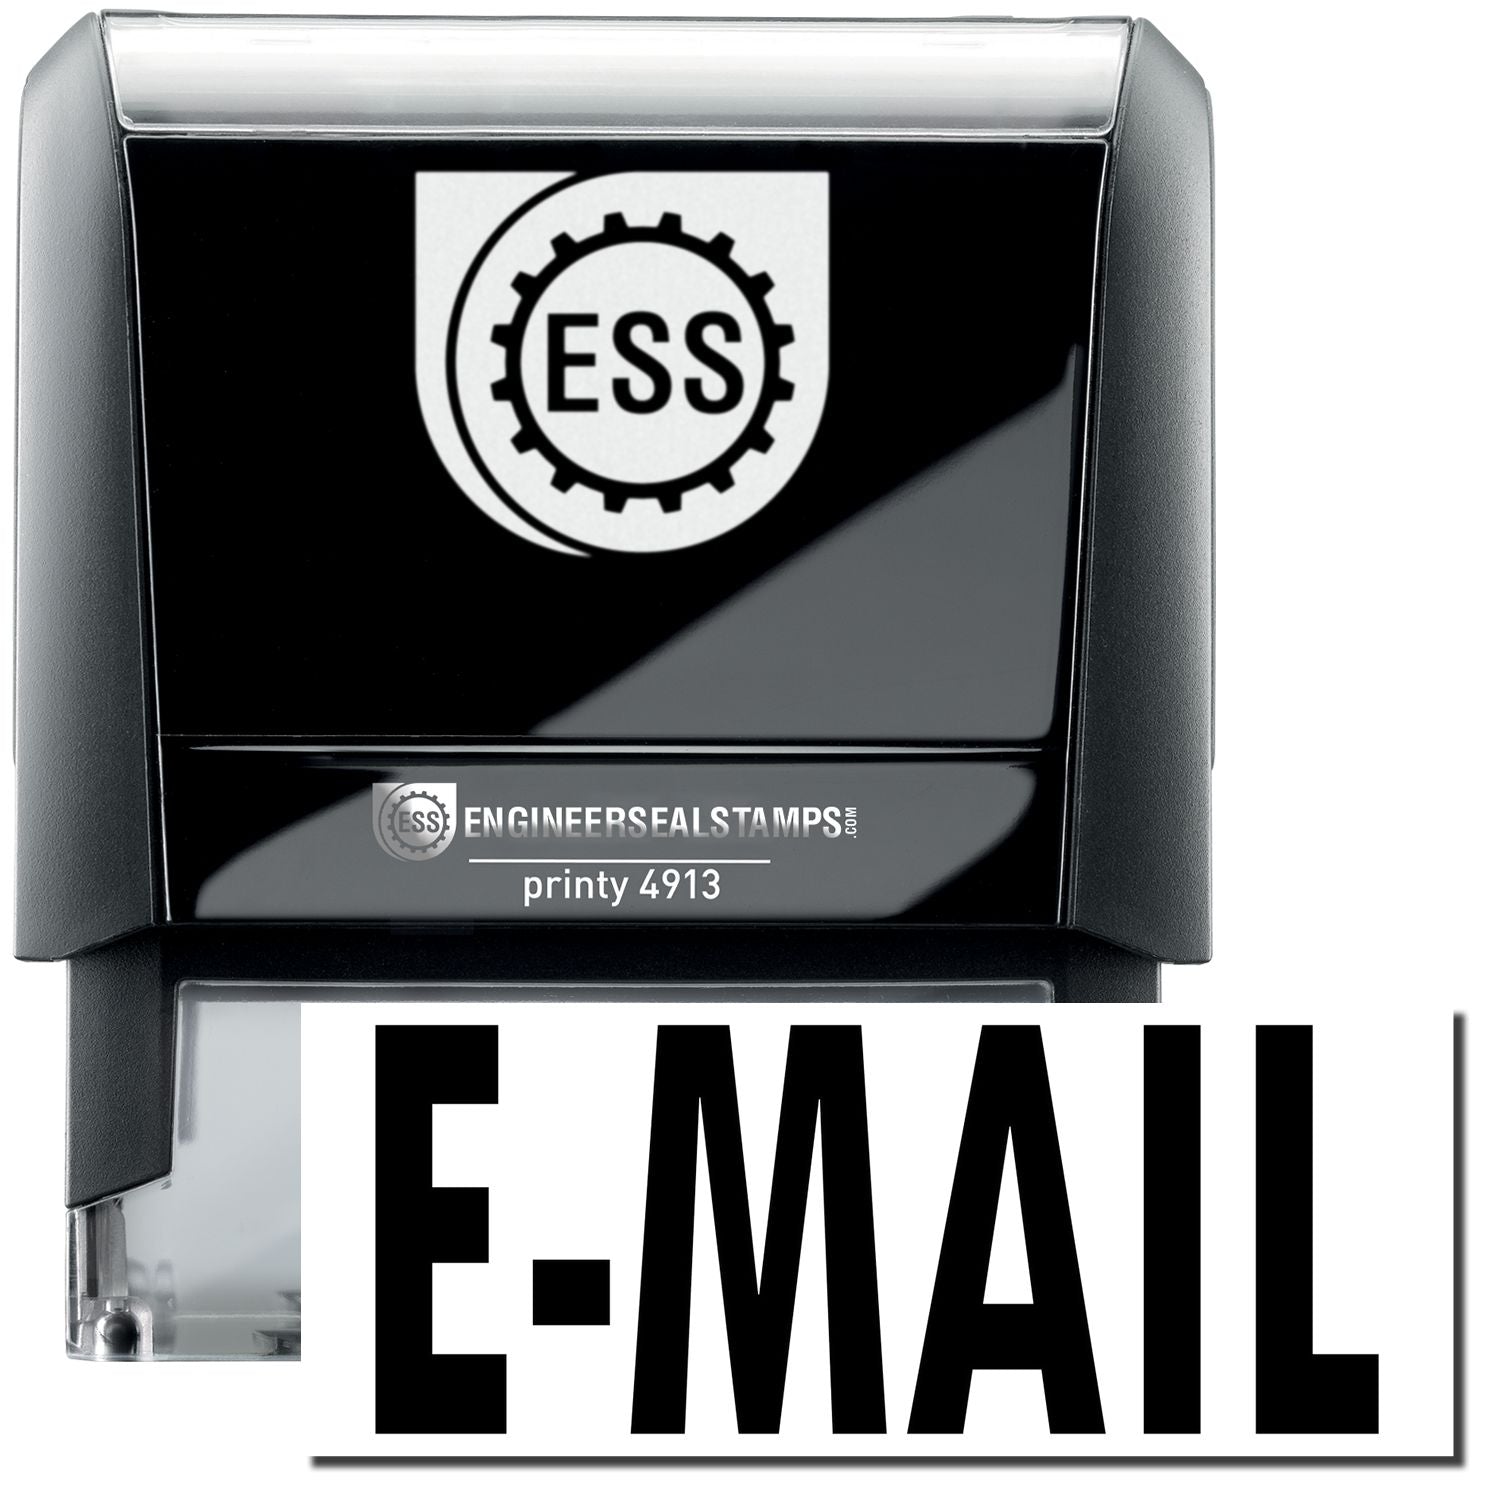 A self-inking stamp with a stamped image showing how the text "E-MAIL" in a large bold font is displayed by it.